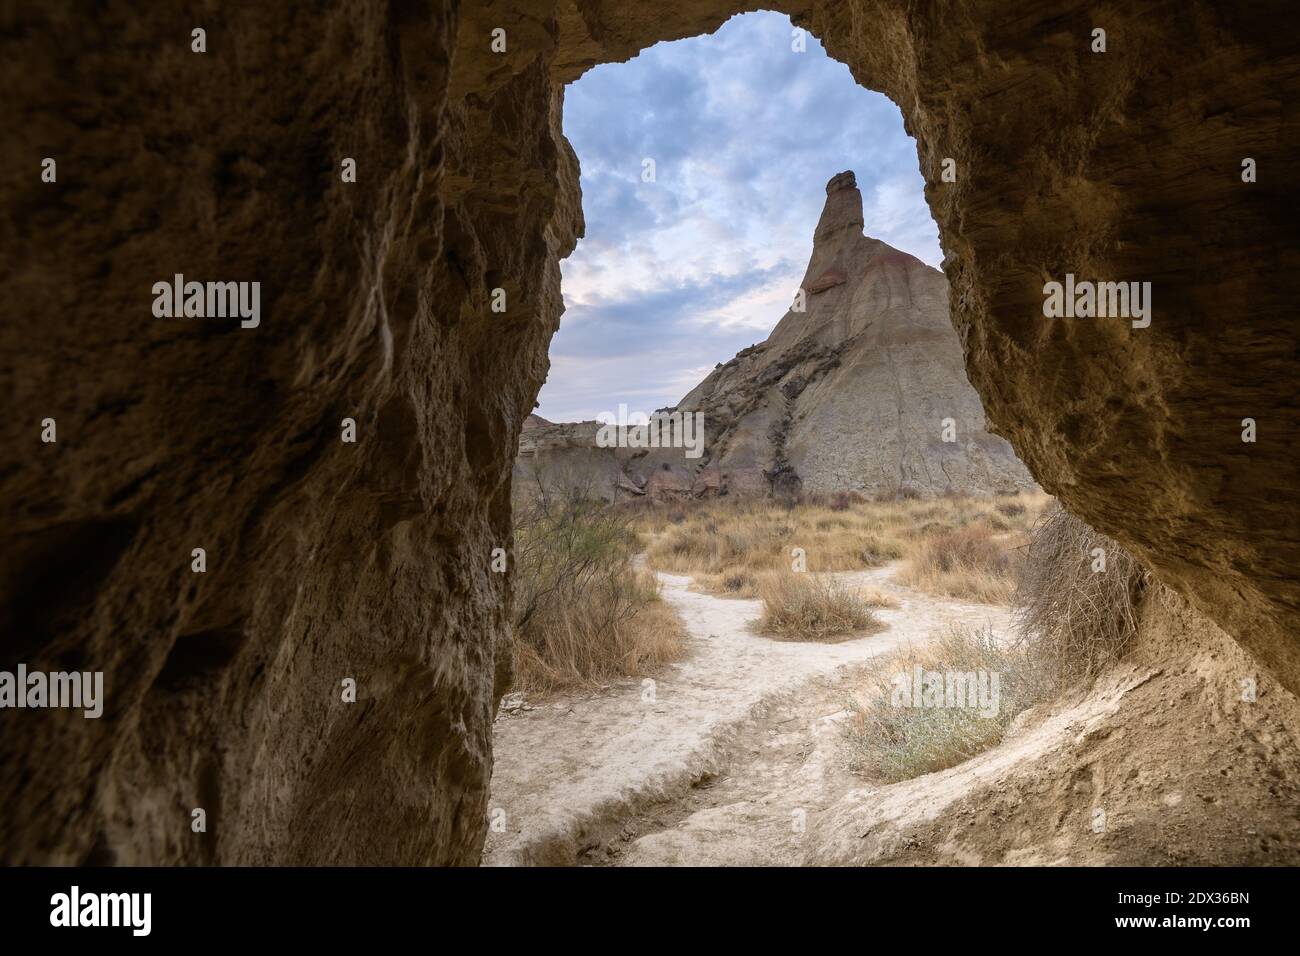 Castildetierra sandstone seen from a cave at Bardenas Reales, Navarre, Spain Stock Photo